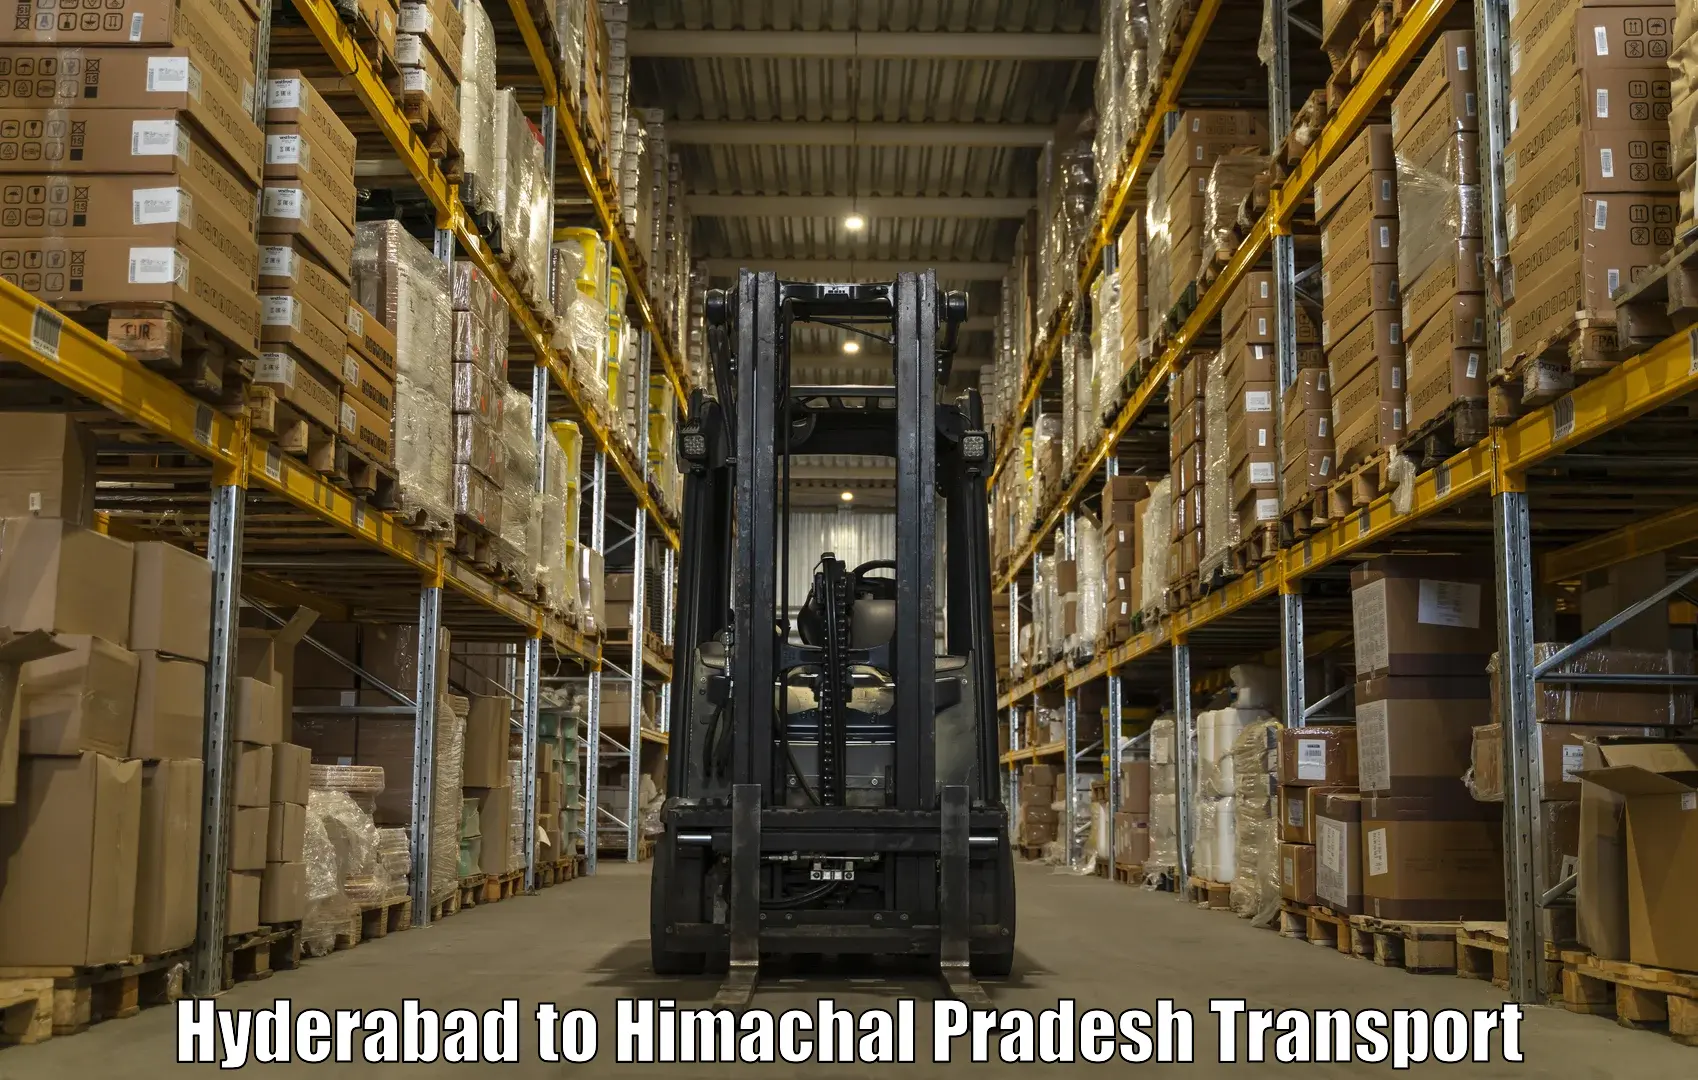 Express transport services in Hyderabad to Rehan